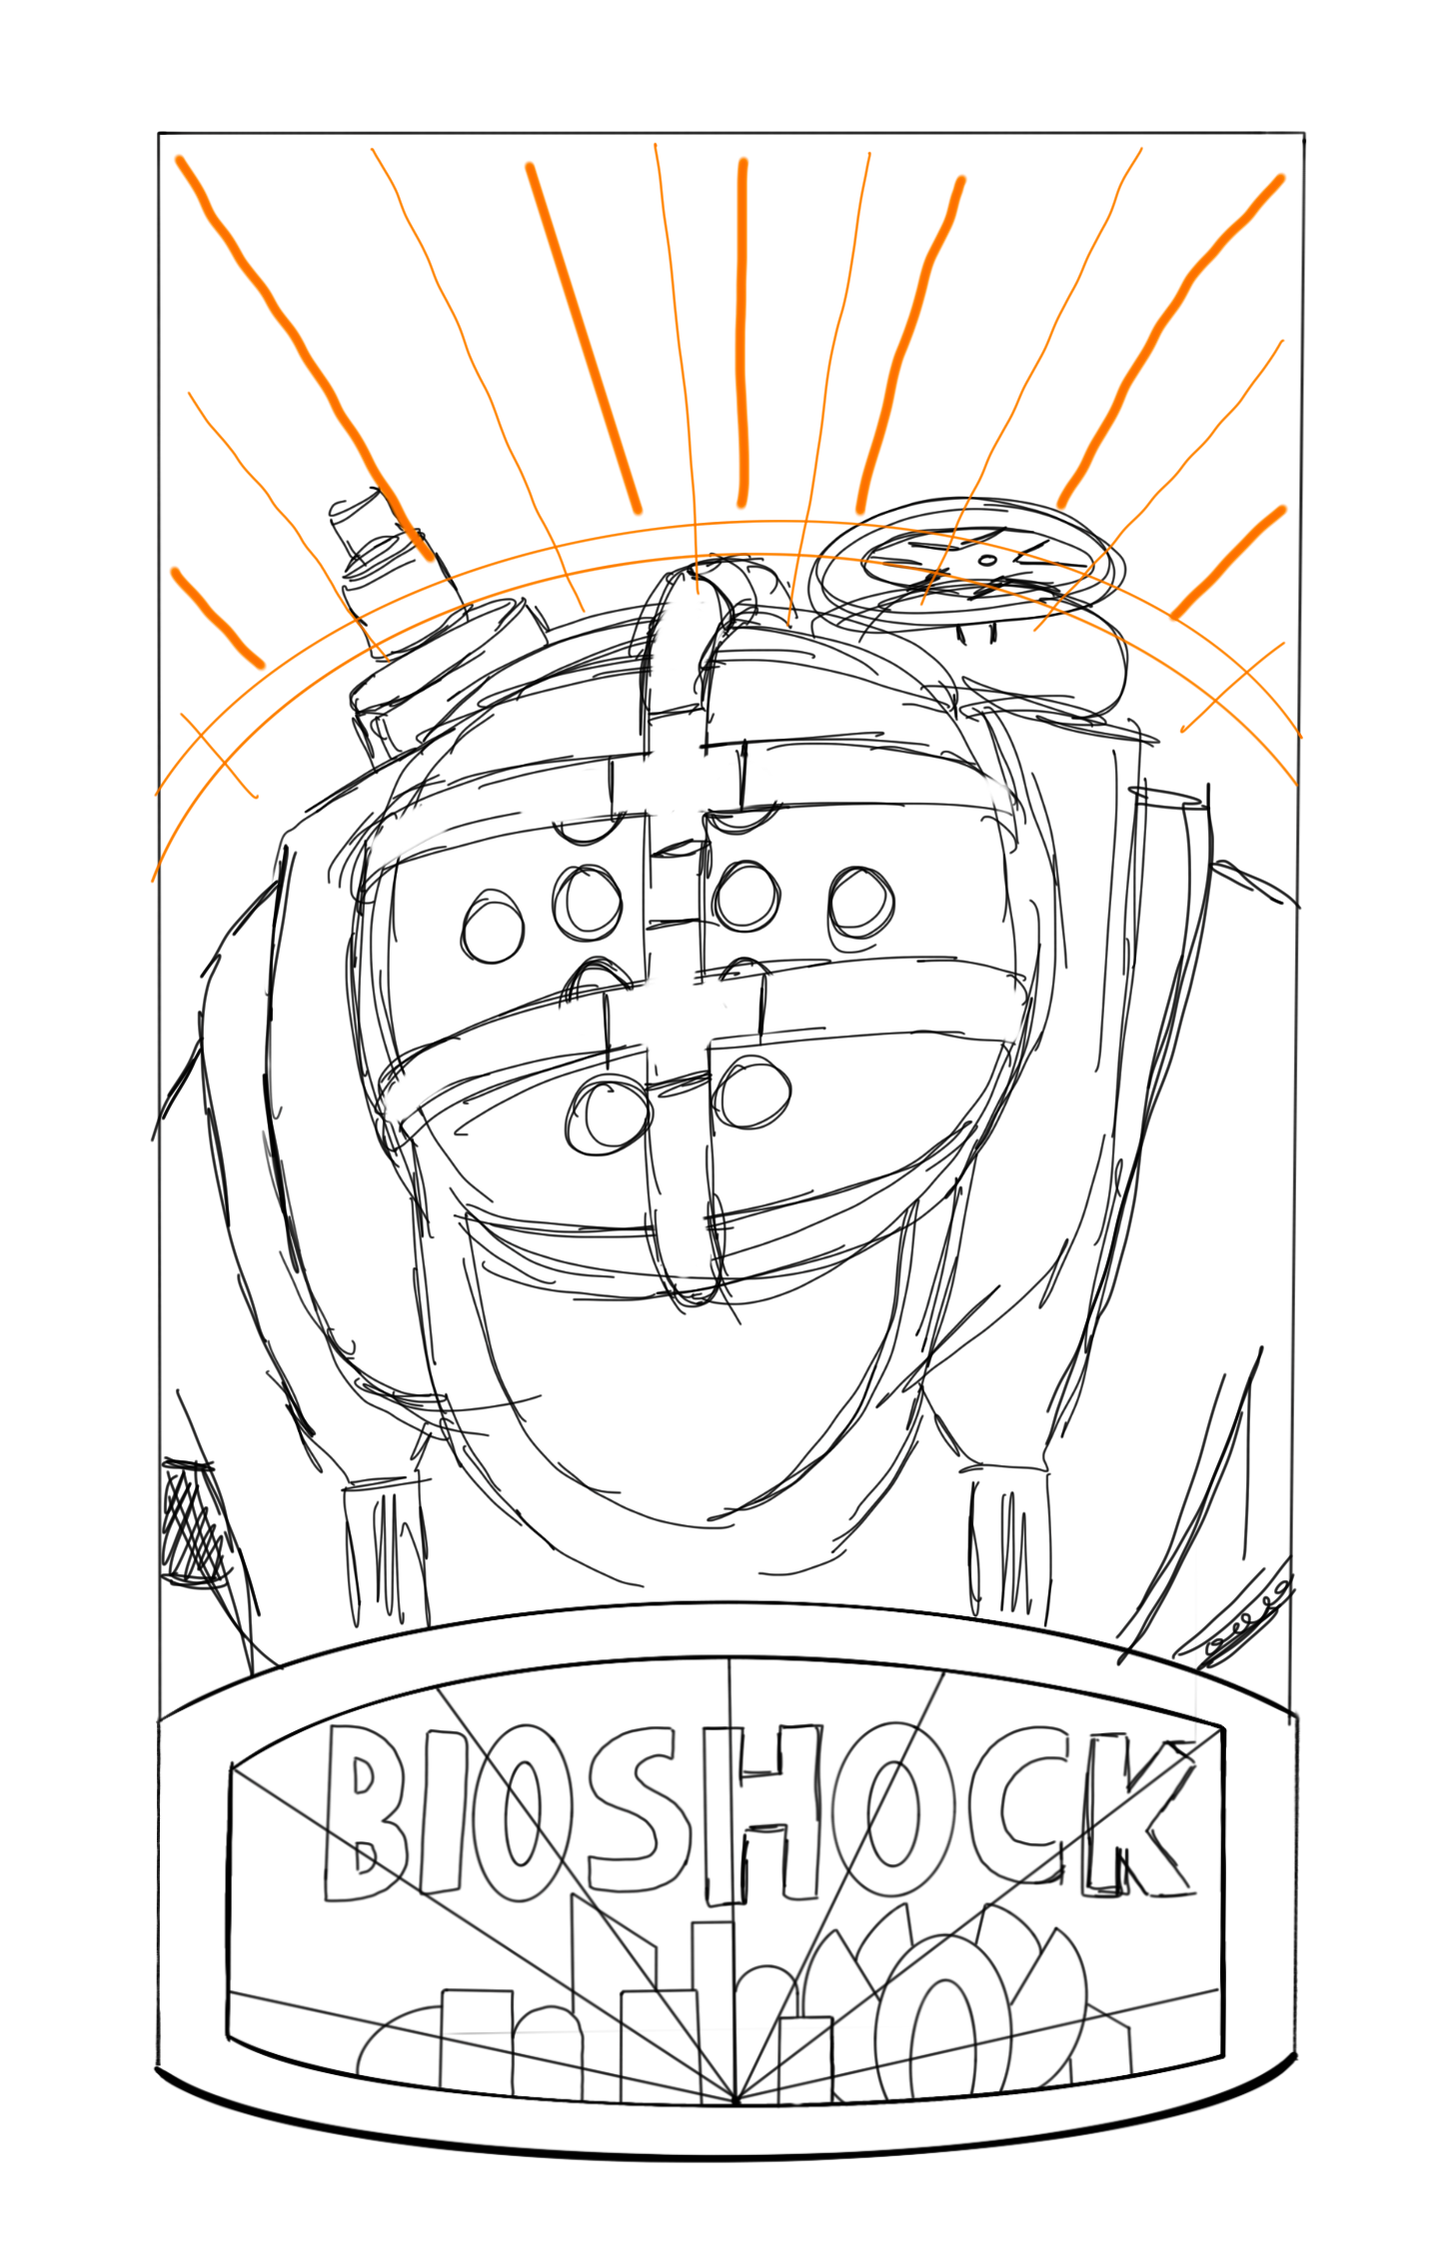 Big Daddy poster sketch with a ray of light in the background and the game title at the bottom